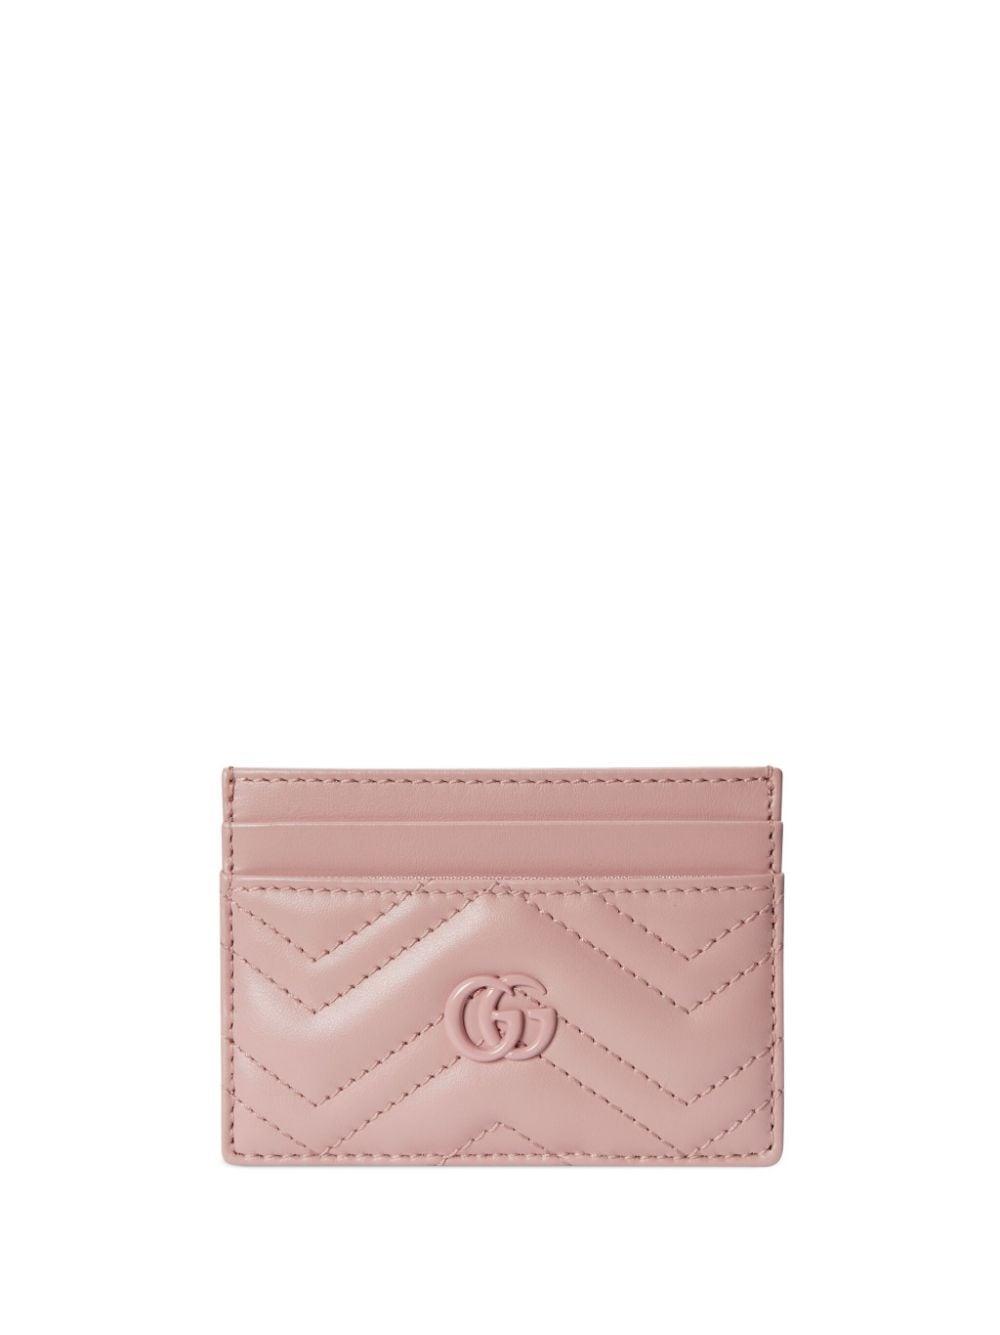 Gucci GG Marmont Leather Card Holder in Pink | Lyst